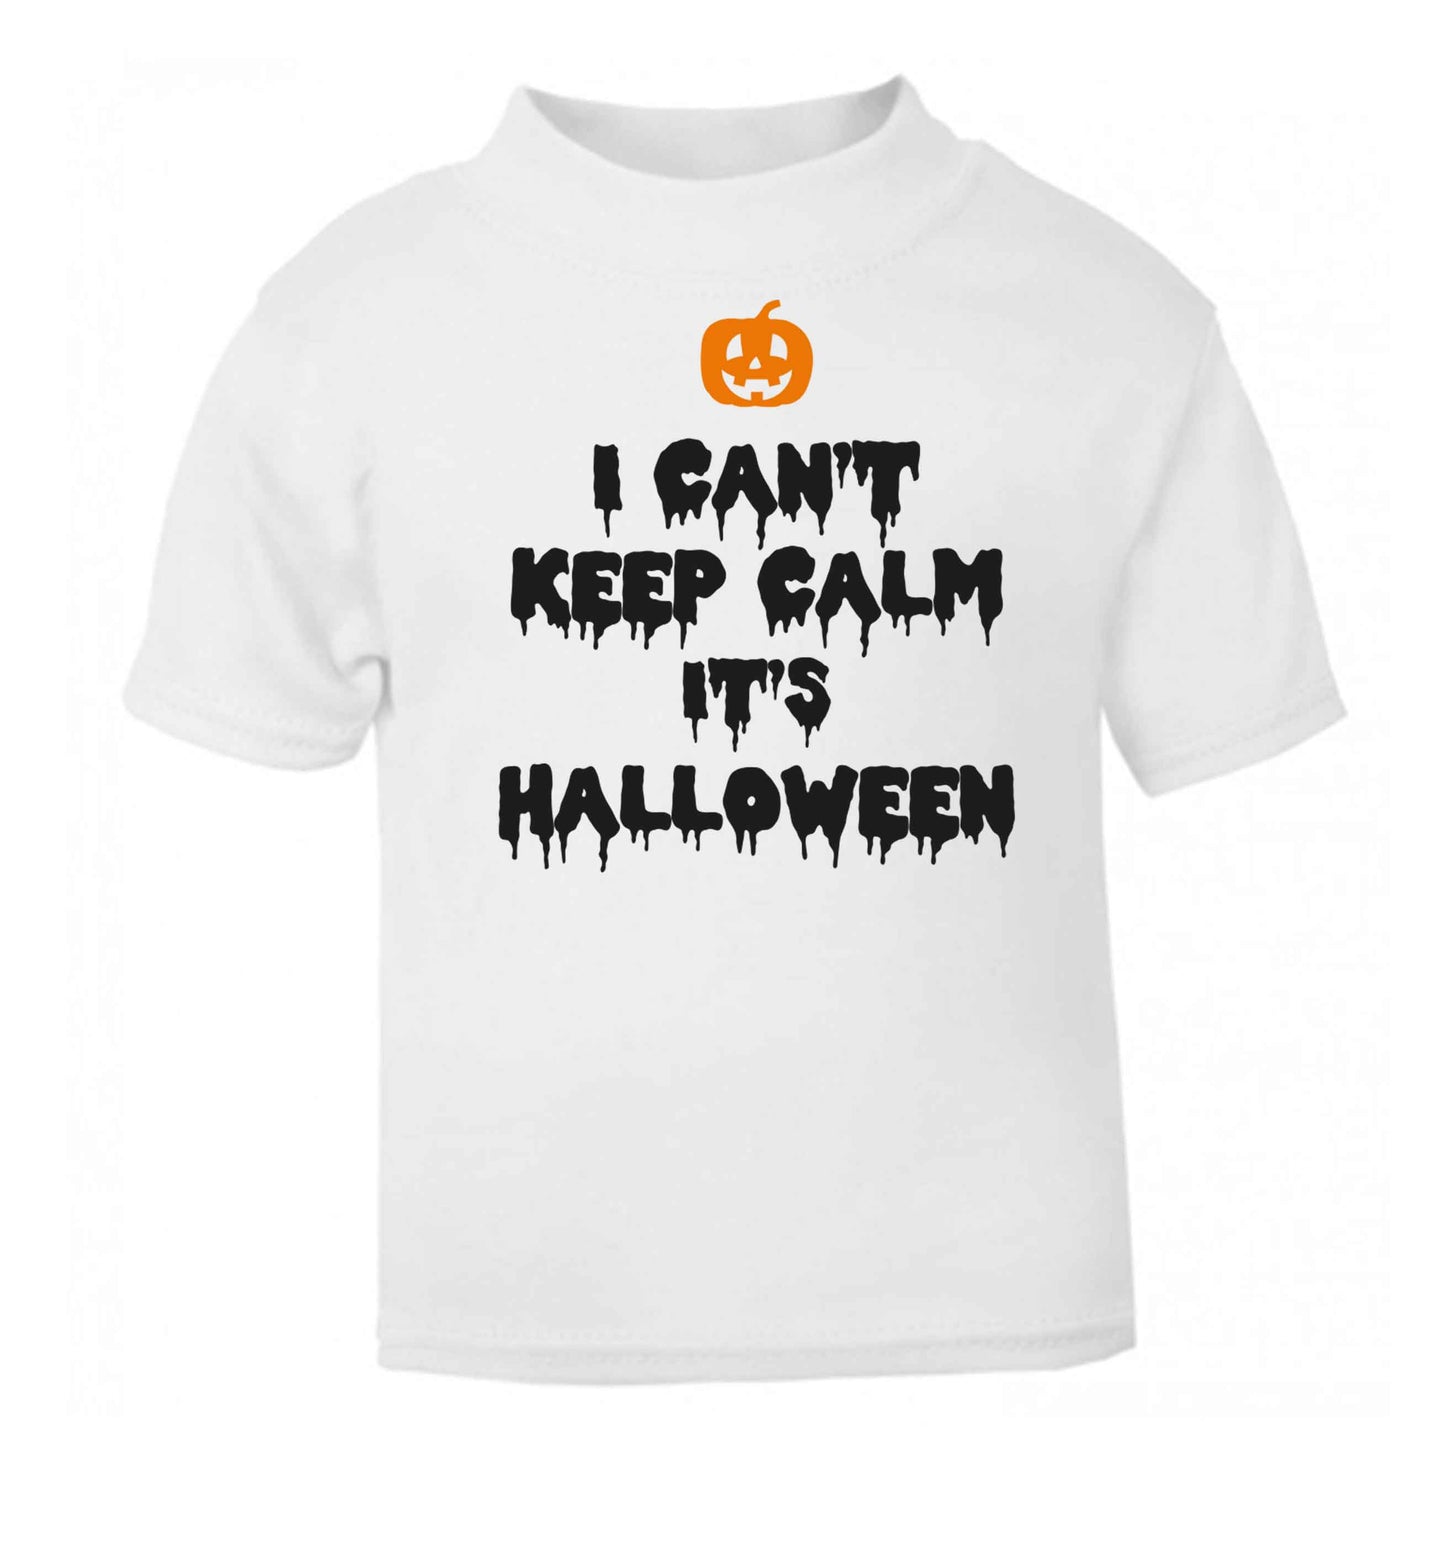 I can't keep calm it's halloween white baby toddler Tshirt 2 Years